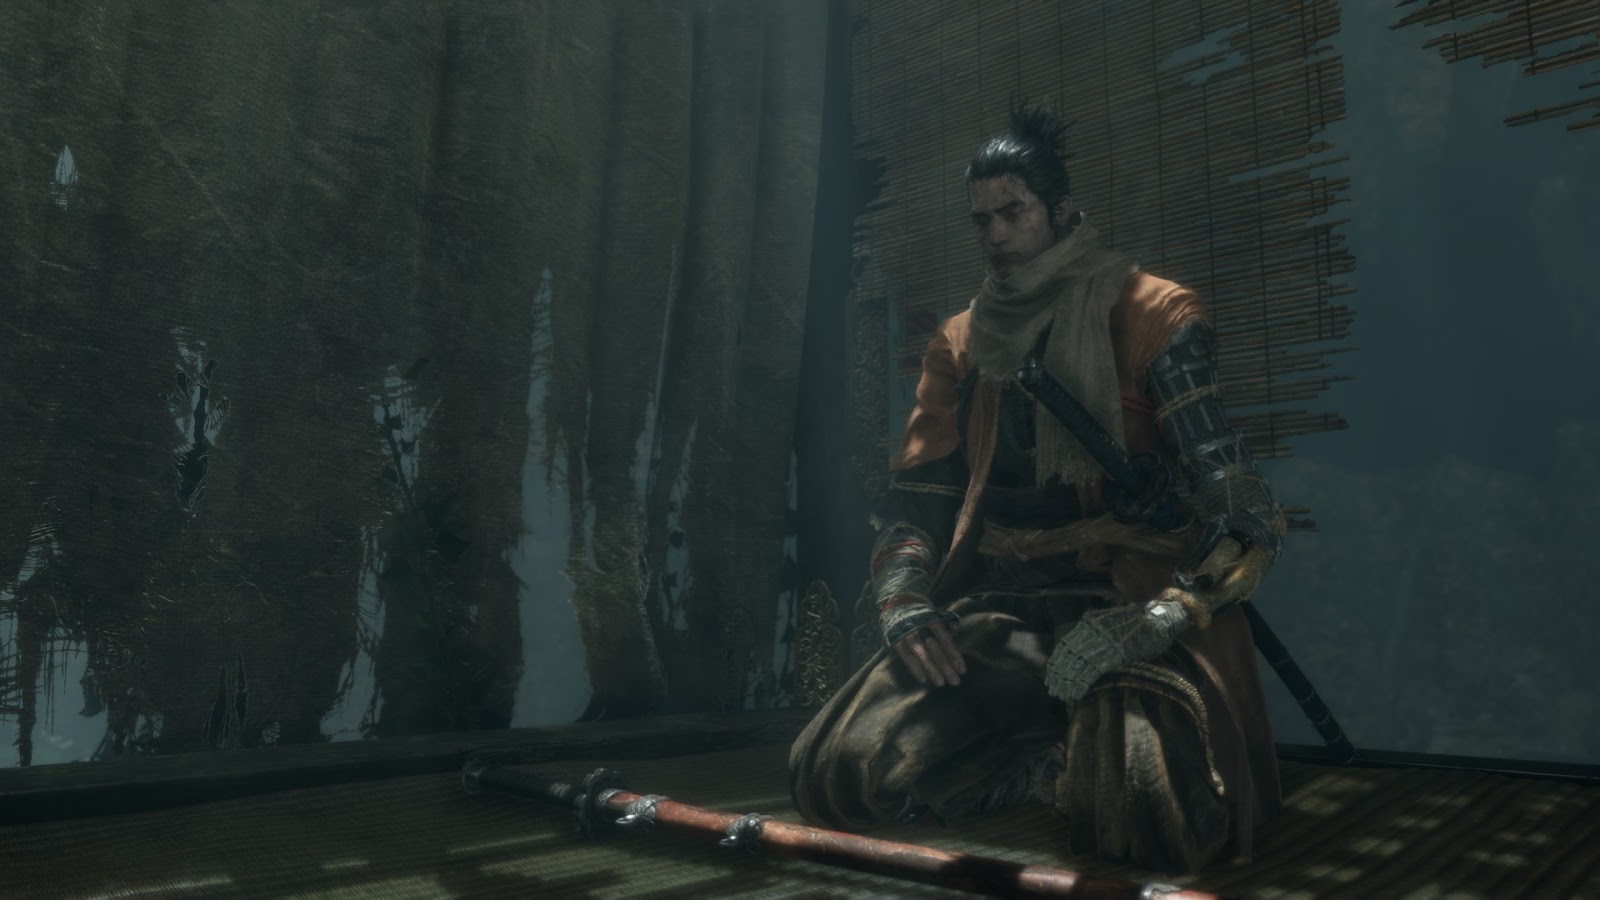 Wolf, the protagonist of Sekiro, resting.